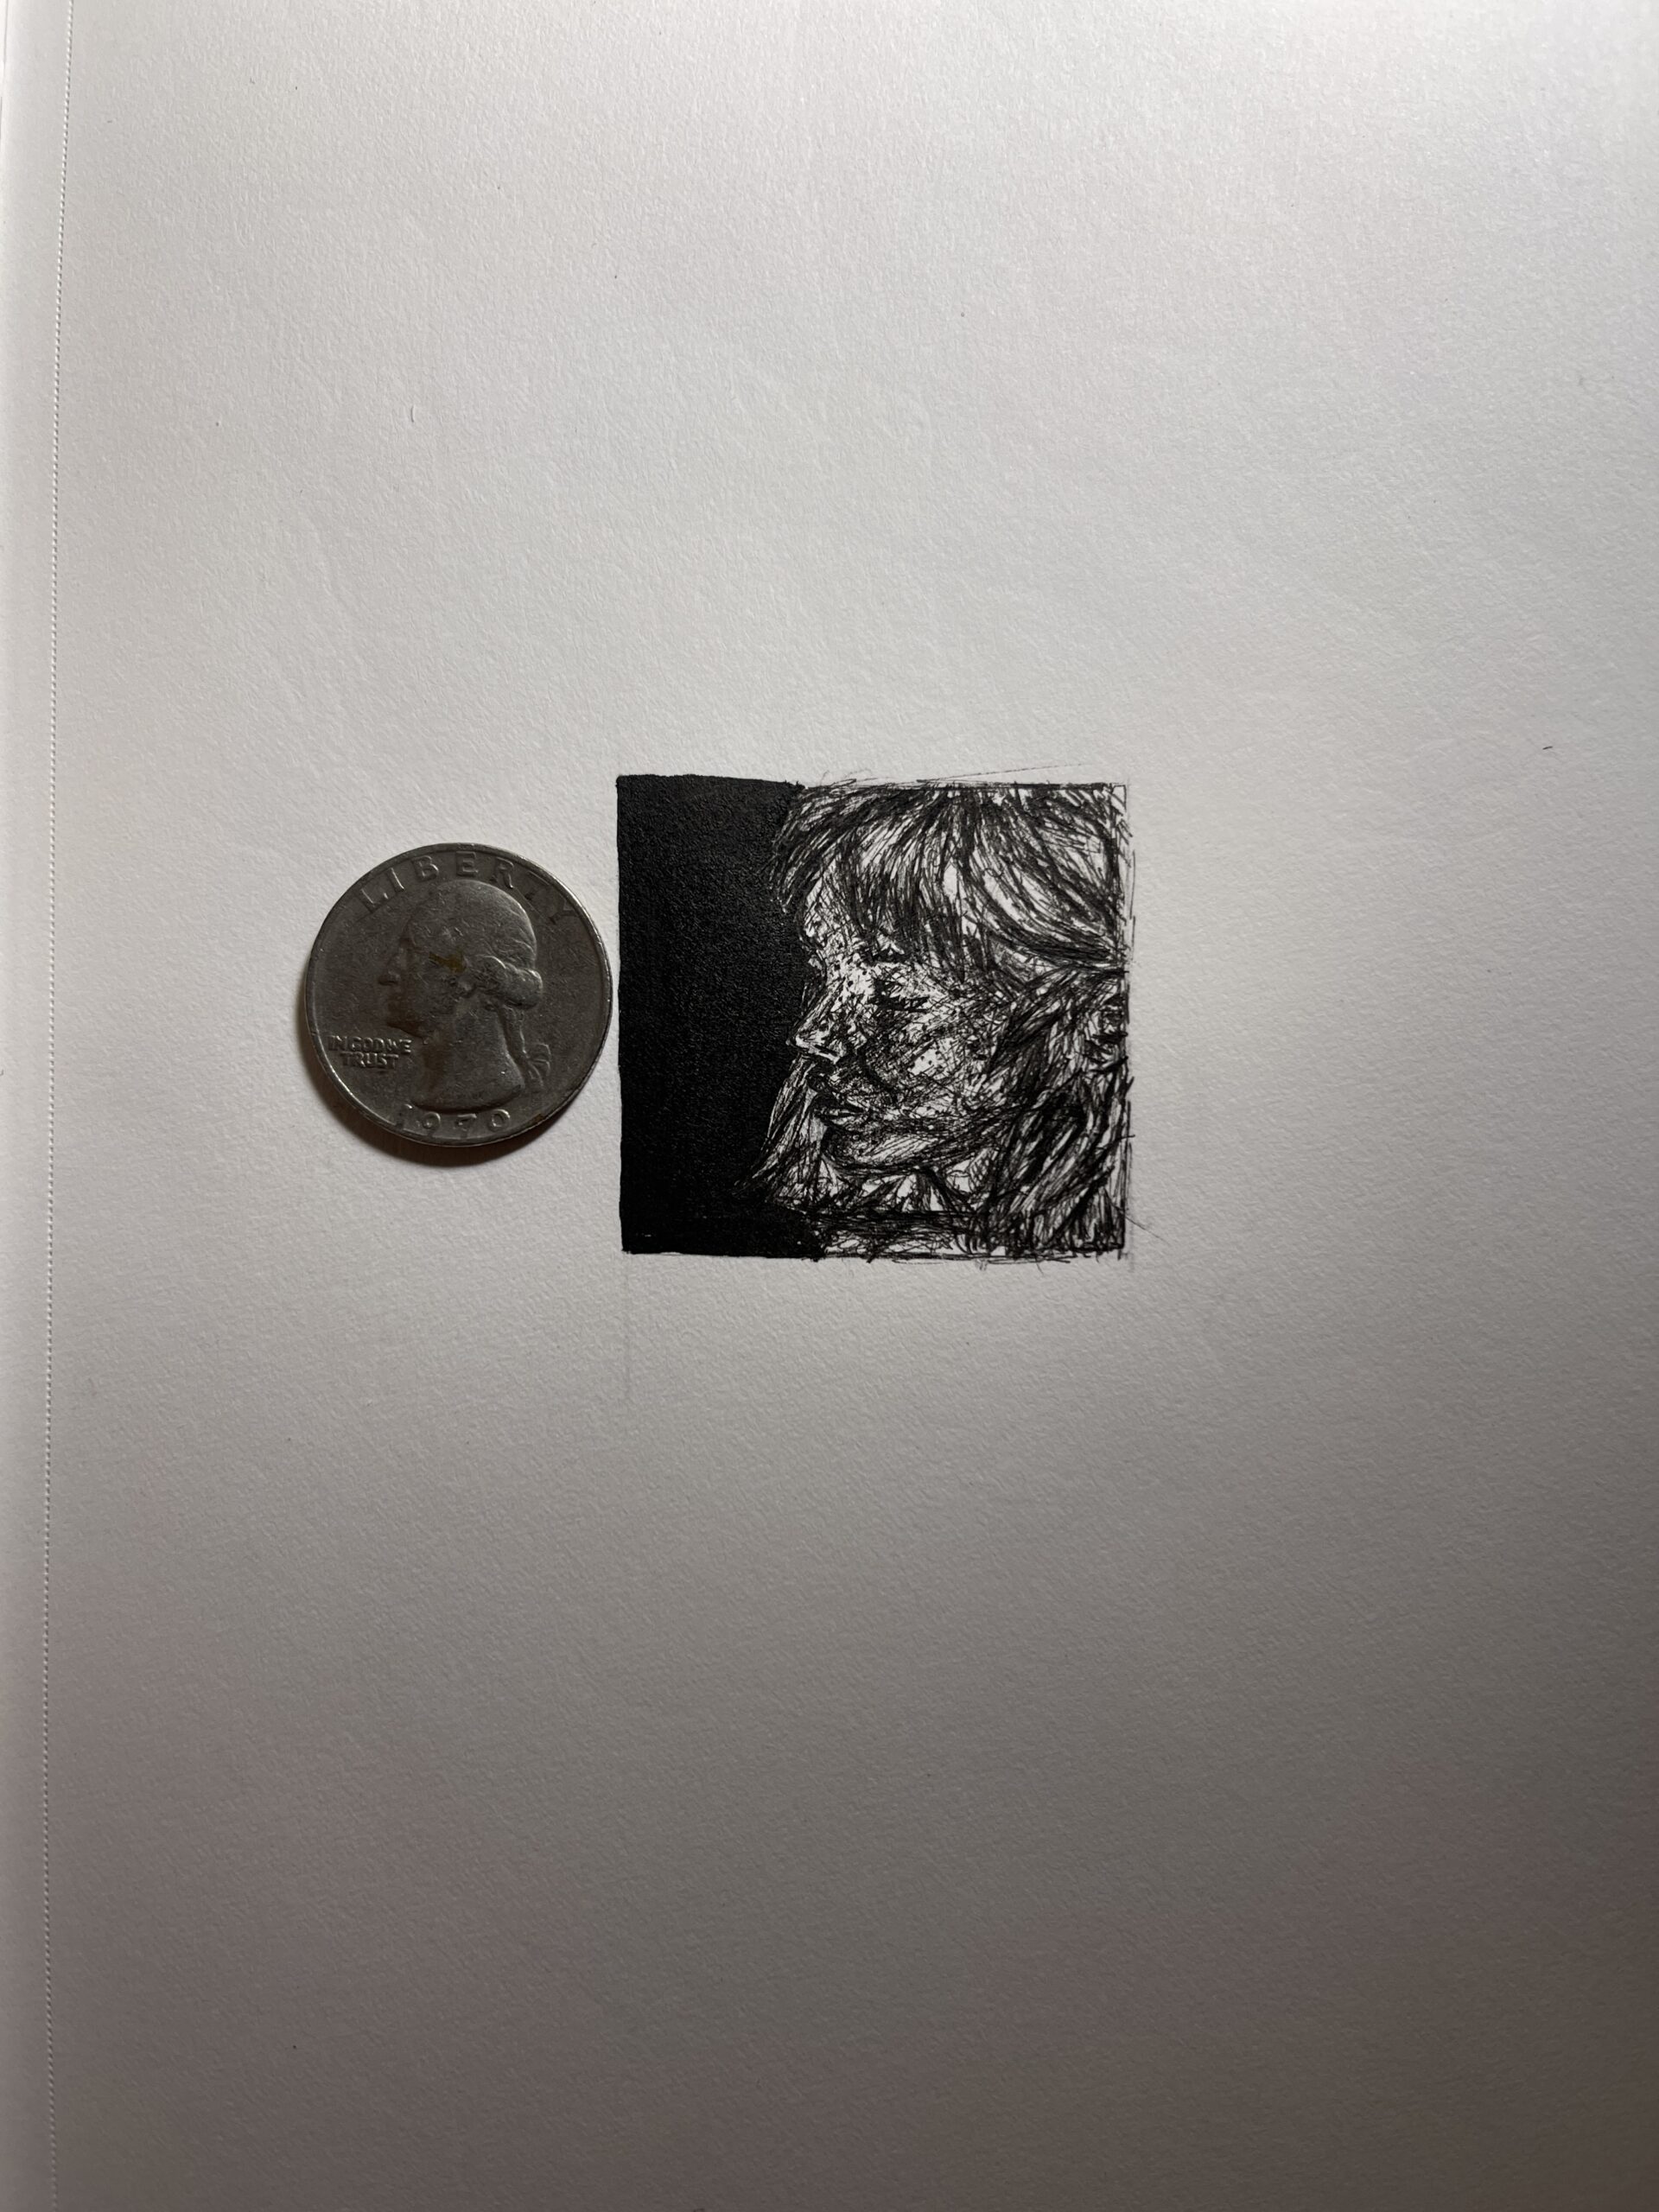 Thinking small: drawing to the size of a quarter